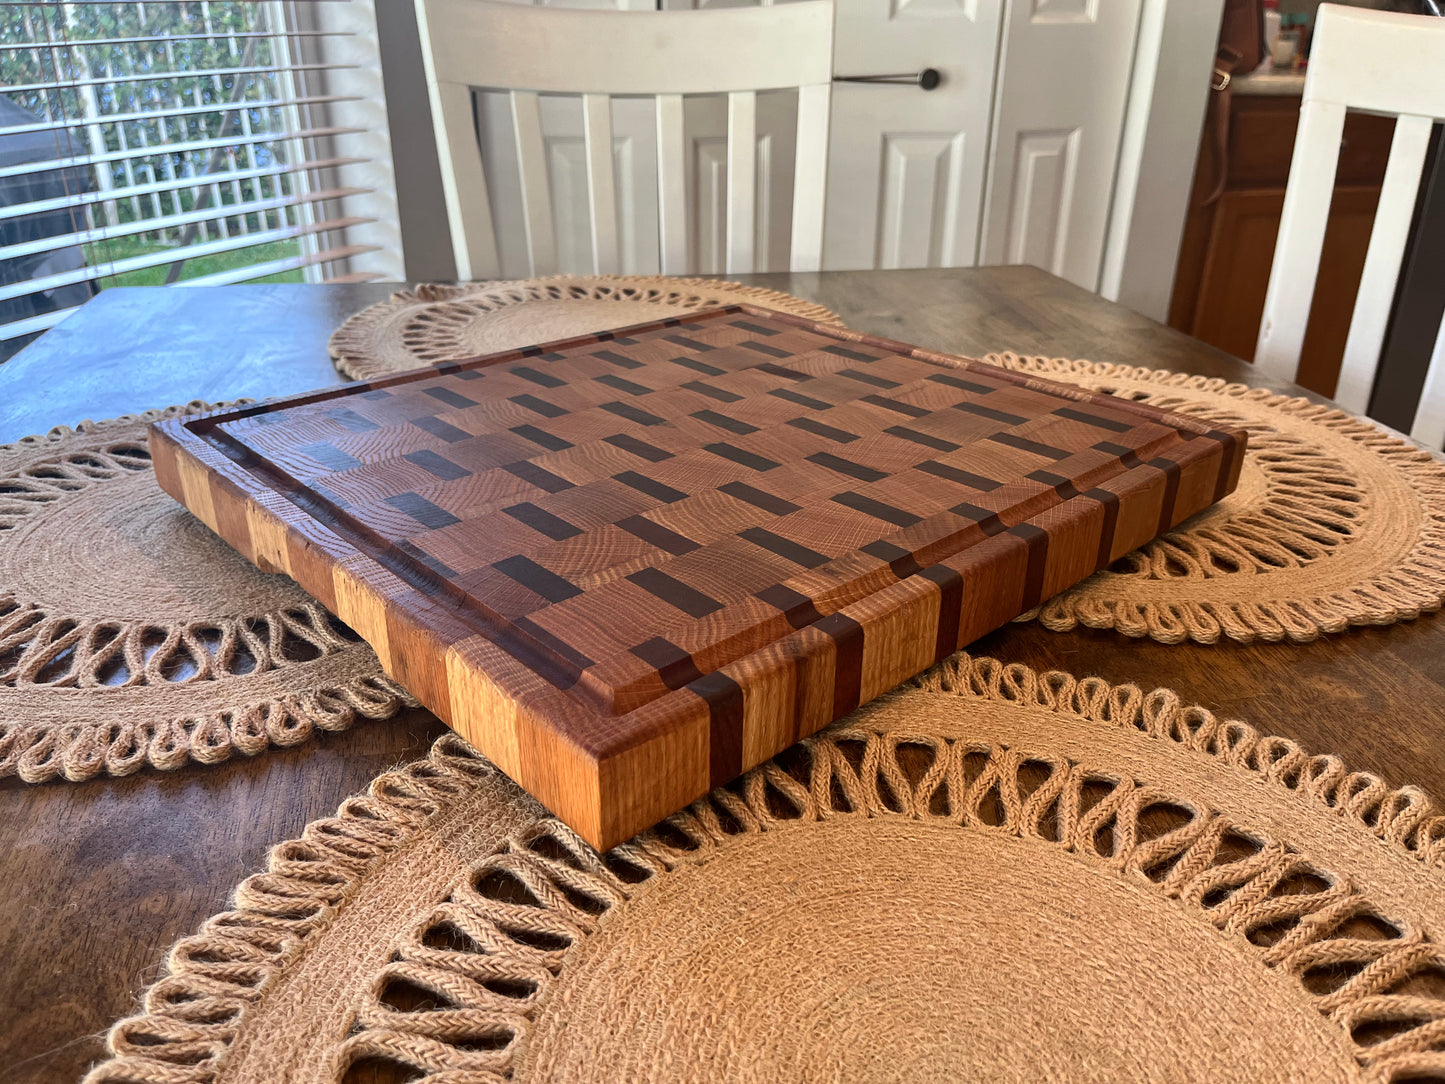 The “Admirals Assistant” Butcher Block and Cutting Board